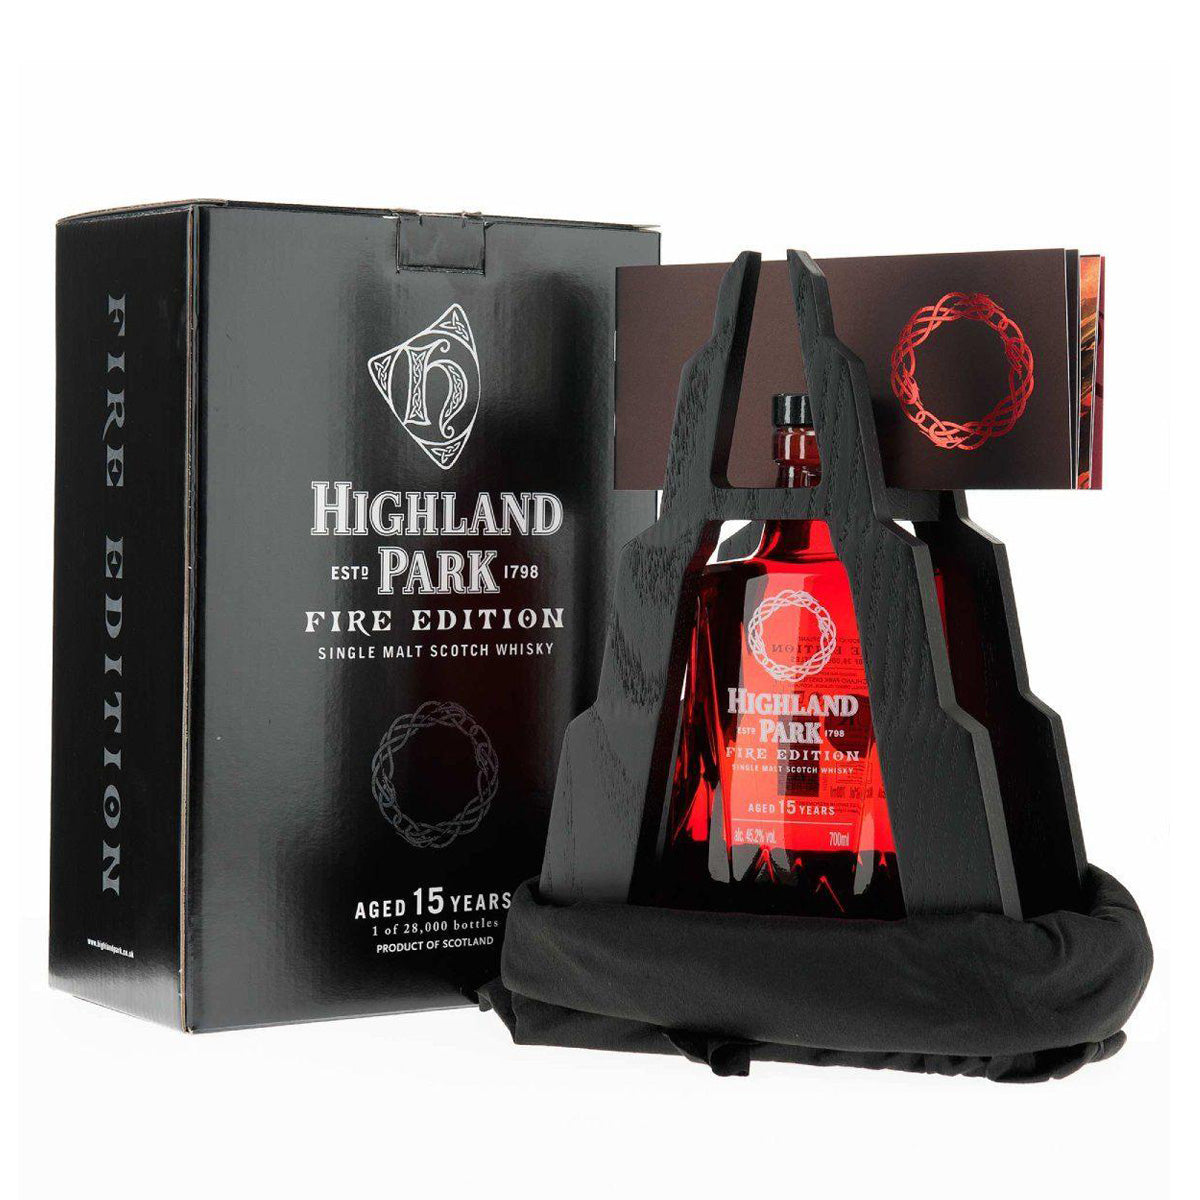 Highland Park Fire Edition 45.2% FRM GX16 single malt Scotch whisky, aged 15 years, with special presentation stand, from the Islands, Scotland – GDV Fine Wines, Hong Kong